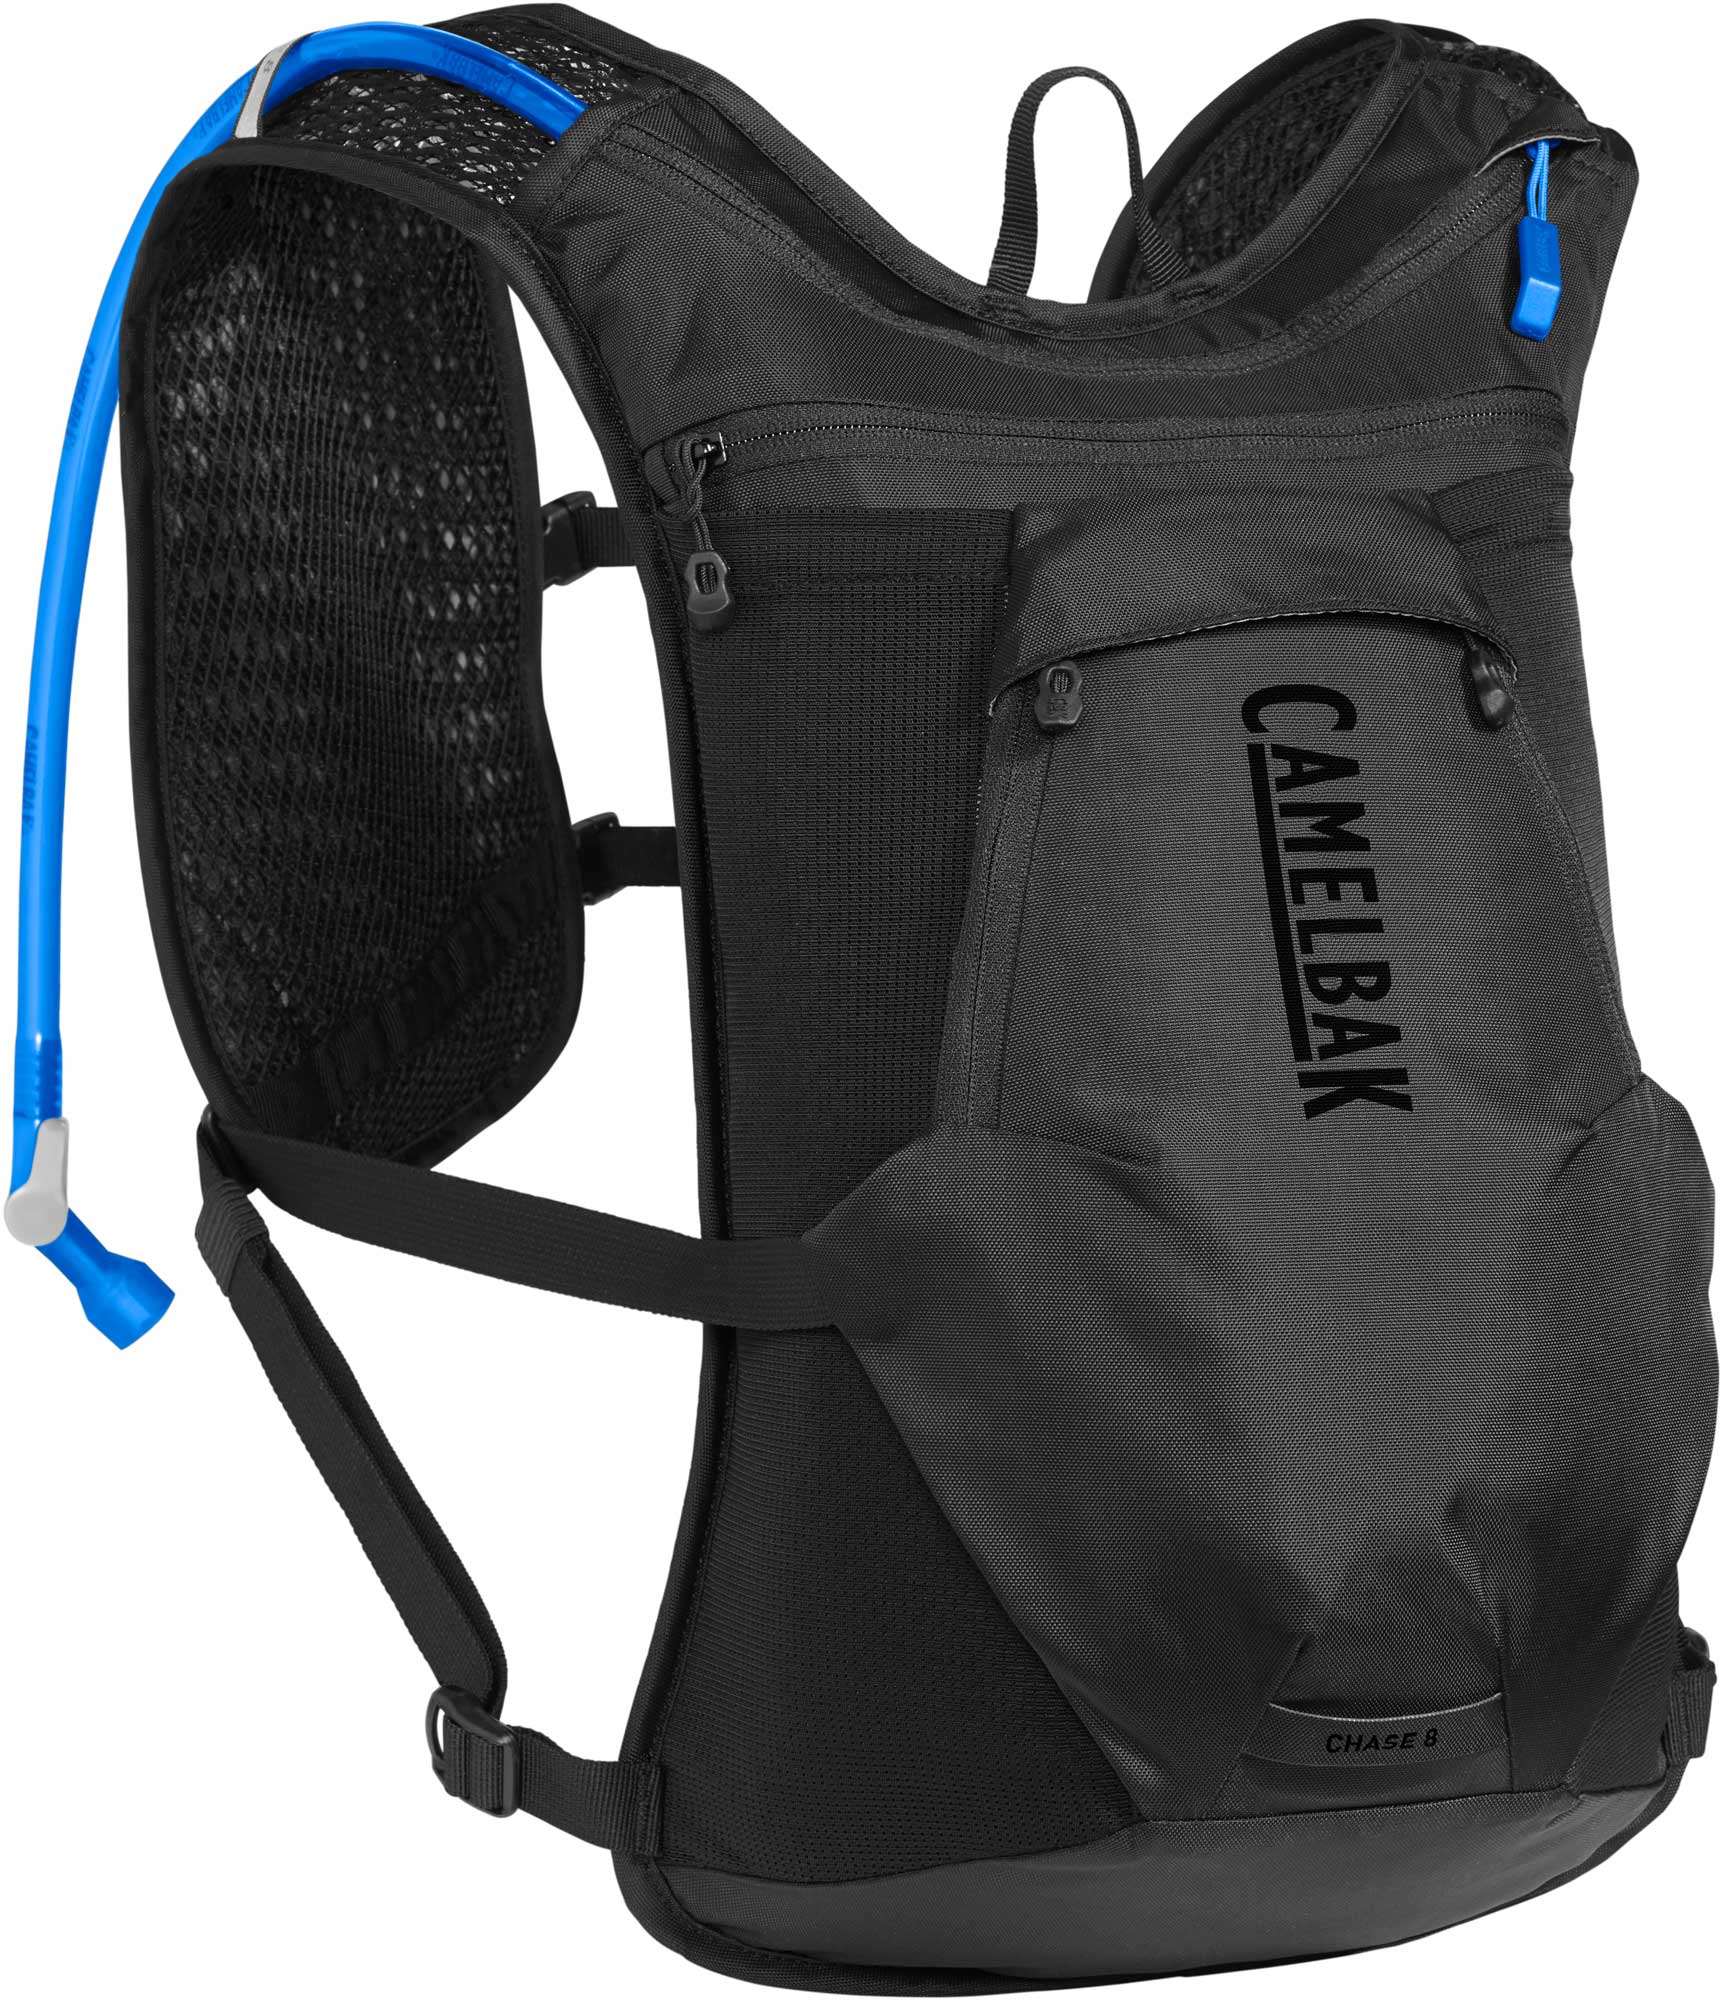 Camelbak Chase 8 Vest - Cycling backpack